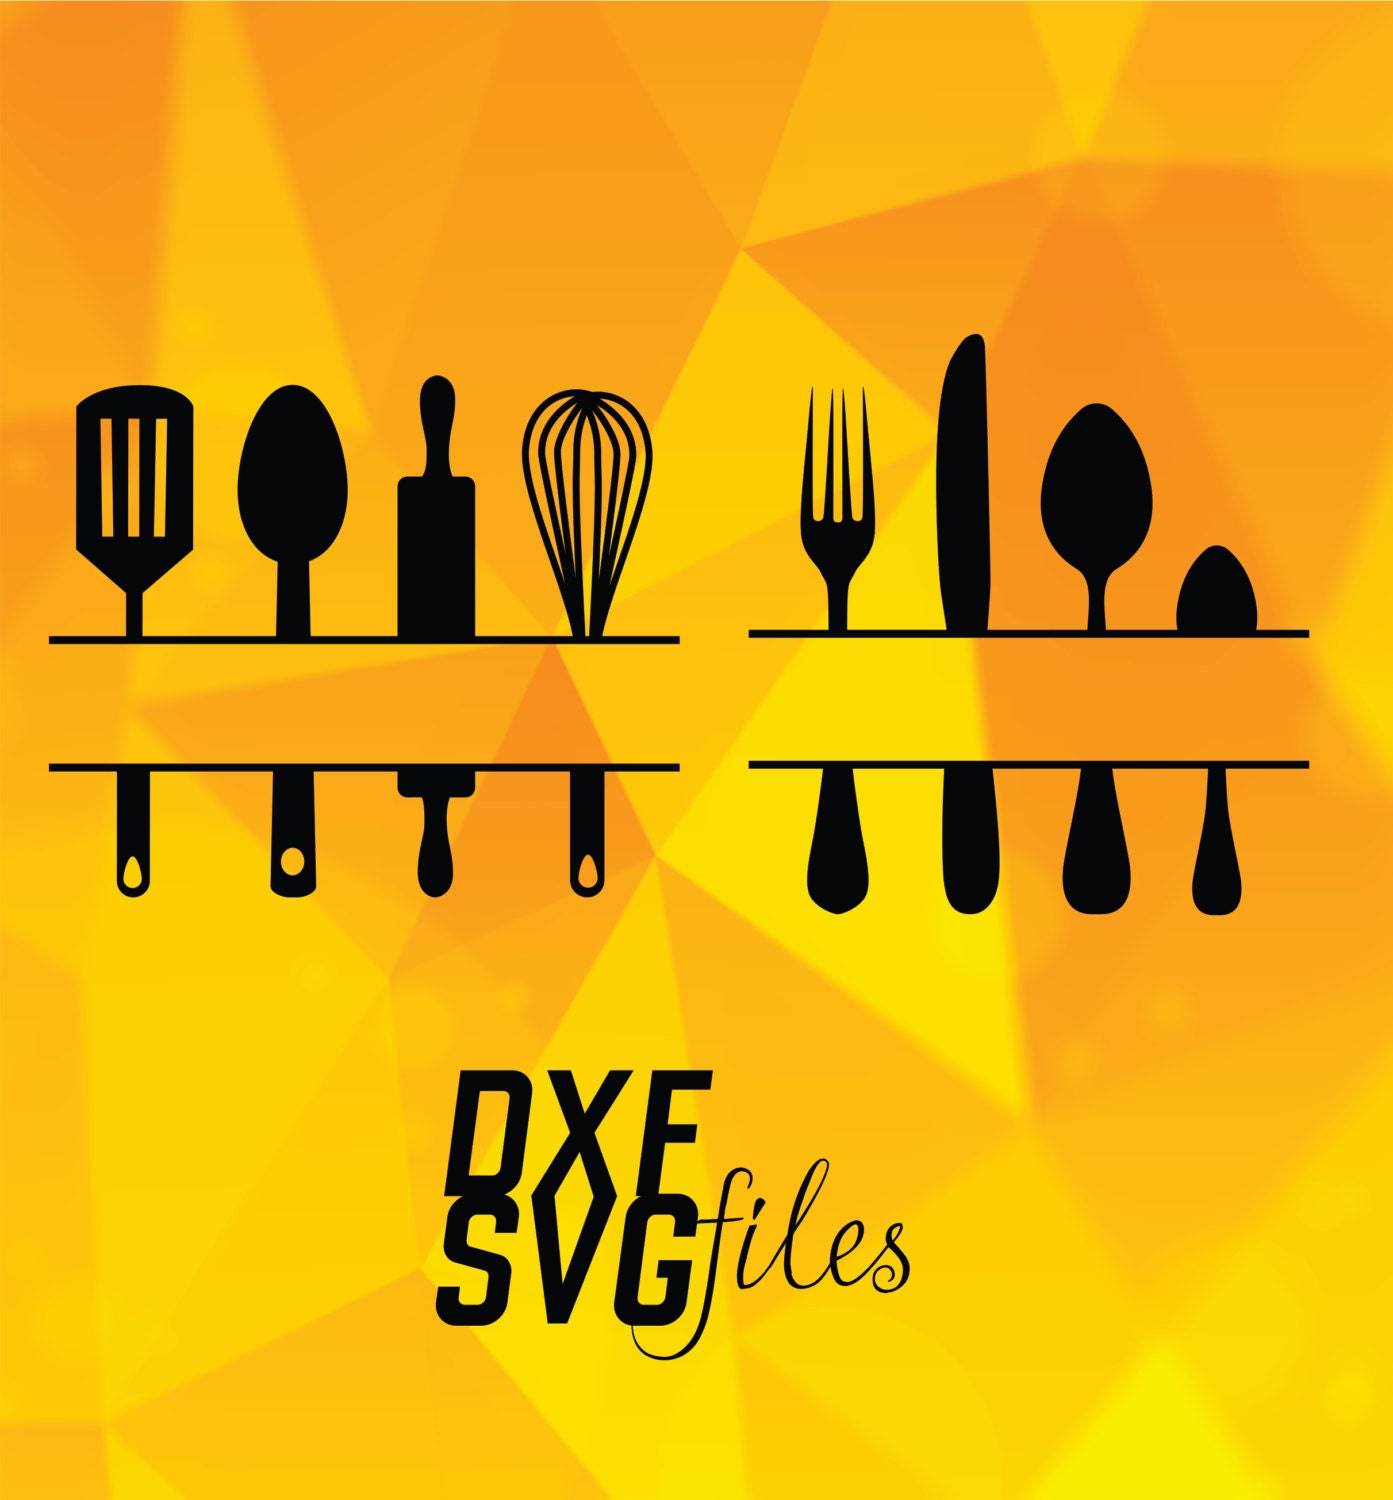 Download 5 Split Kitchen Utensils Silhouettes DXF and SVG files by dxfsvg